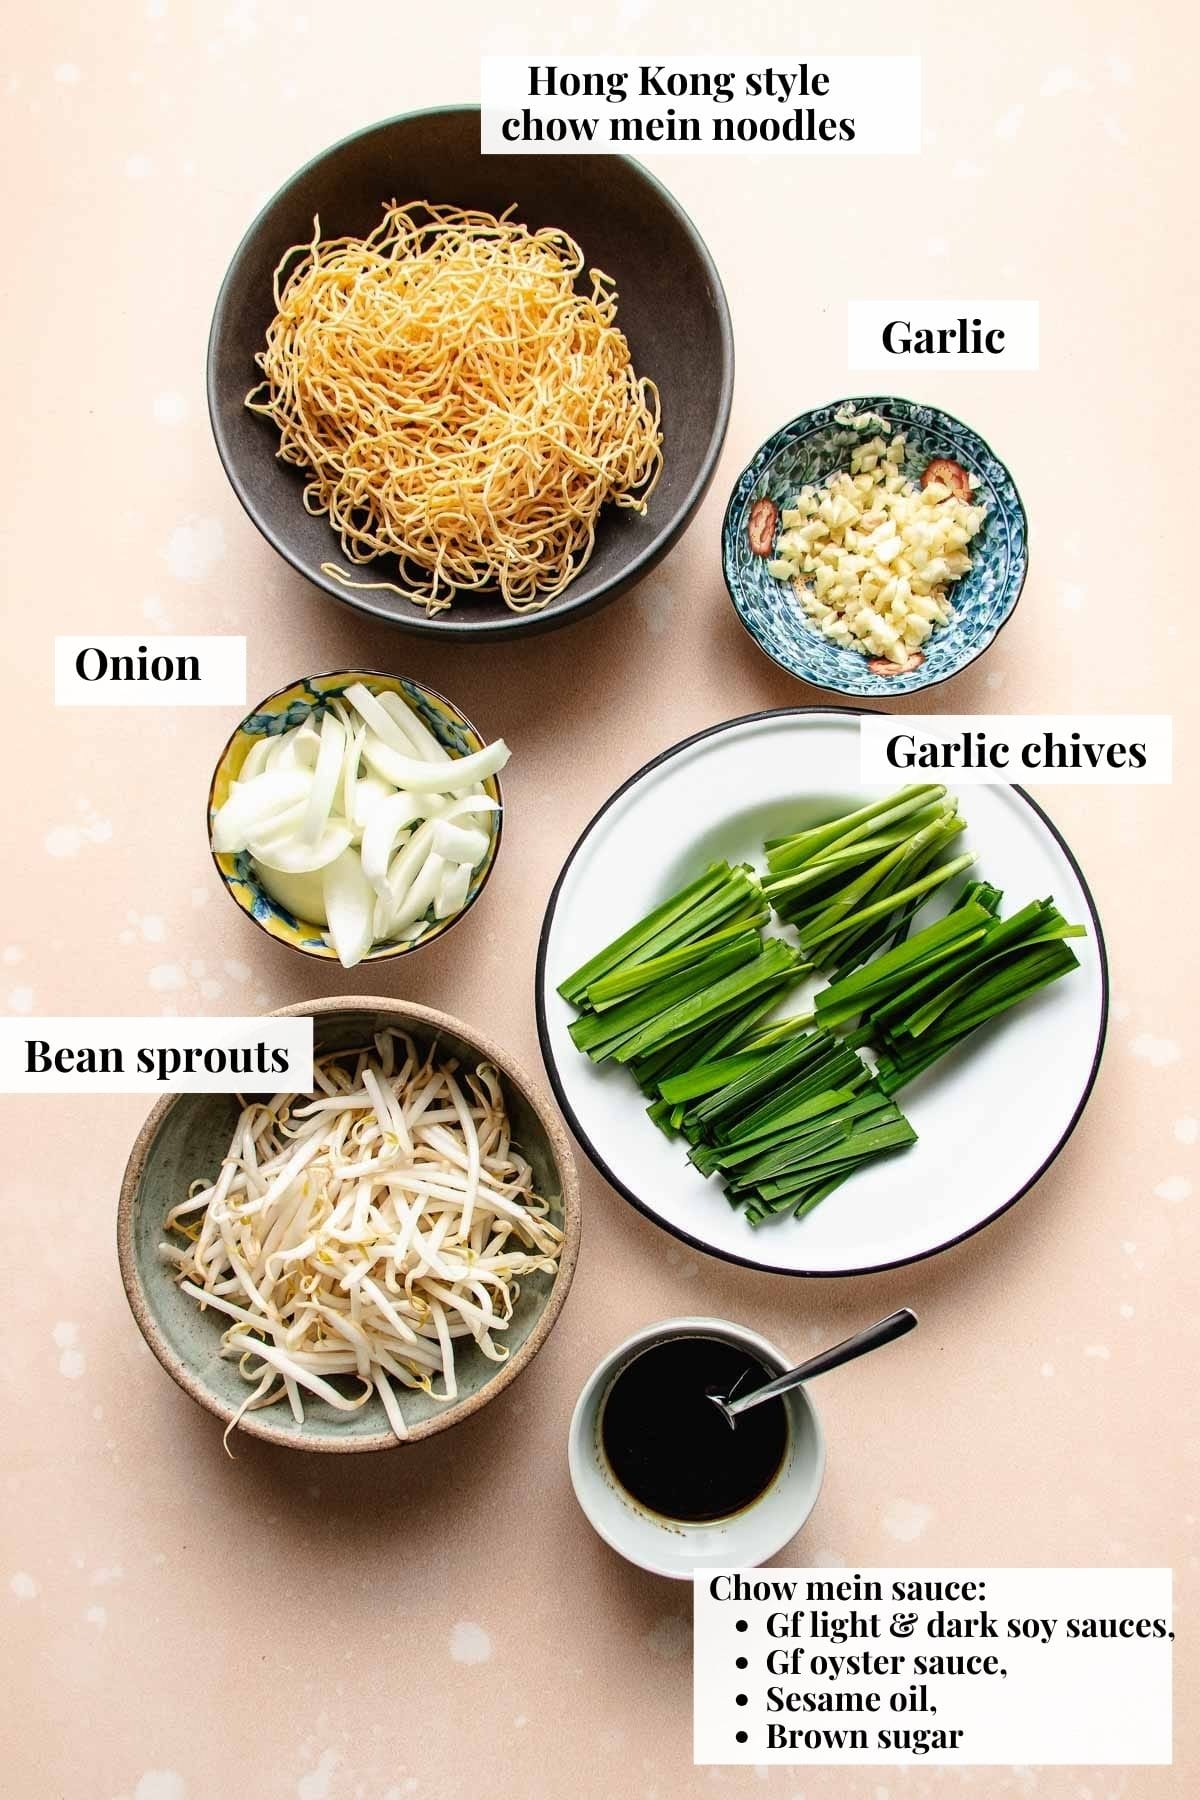 Photo shows ingredients used to make Cantonese noodles.